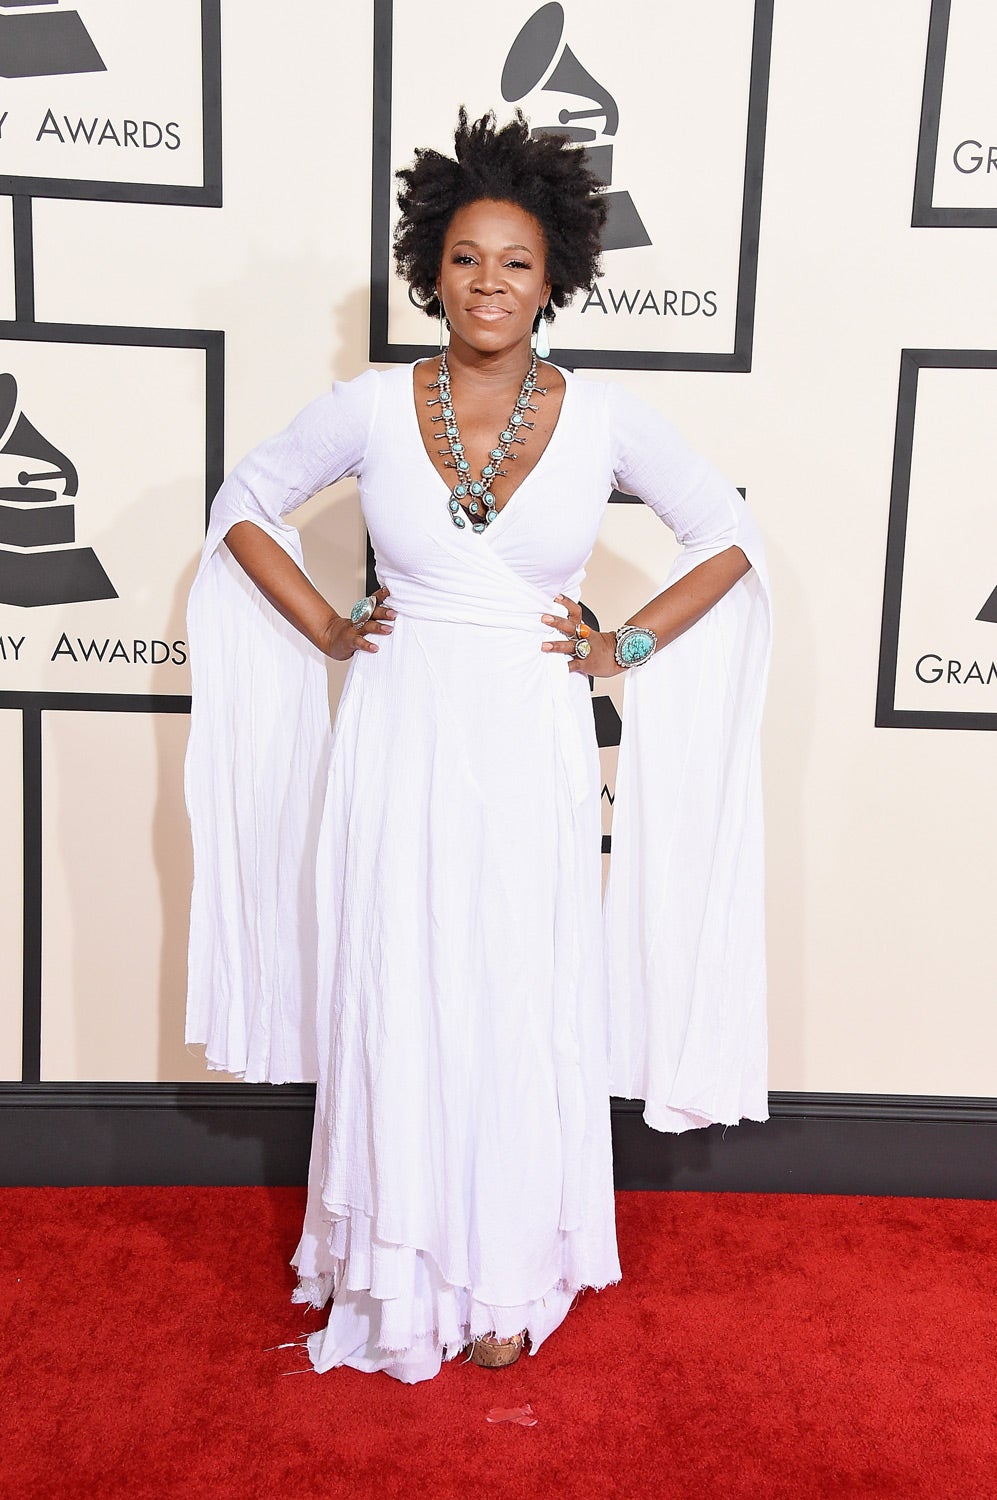 India.Arie To Make Appearance on Tonight's Episode of Being Mary Jane